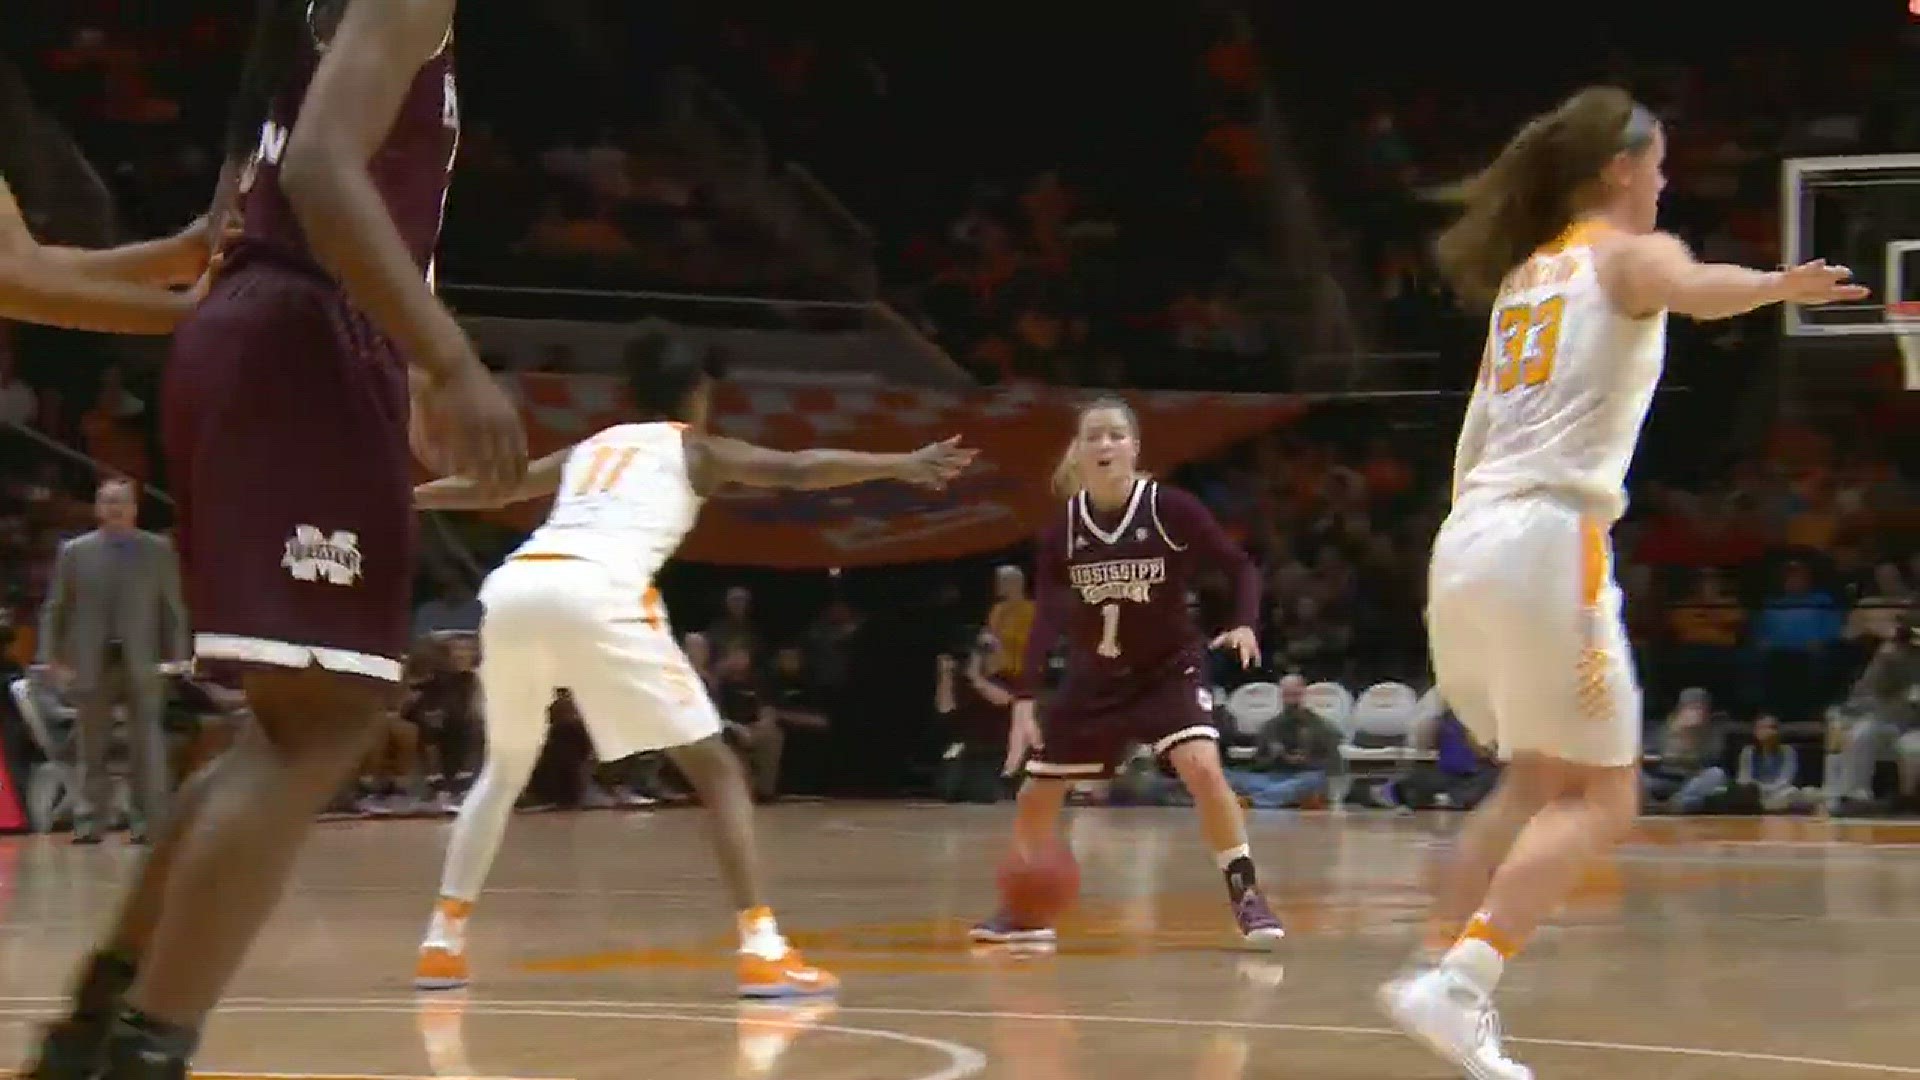 After poor execution in the 2nd quarter, Holly Warlick was not pleased after this three pointer at the end of the period.